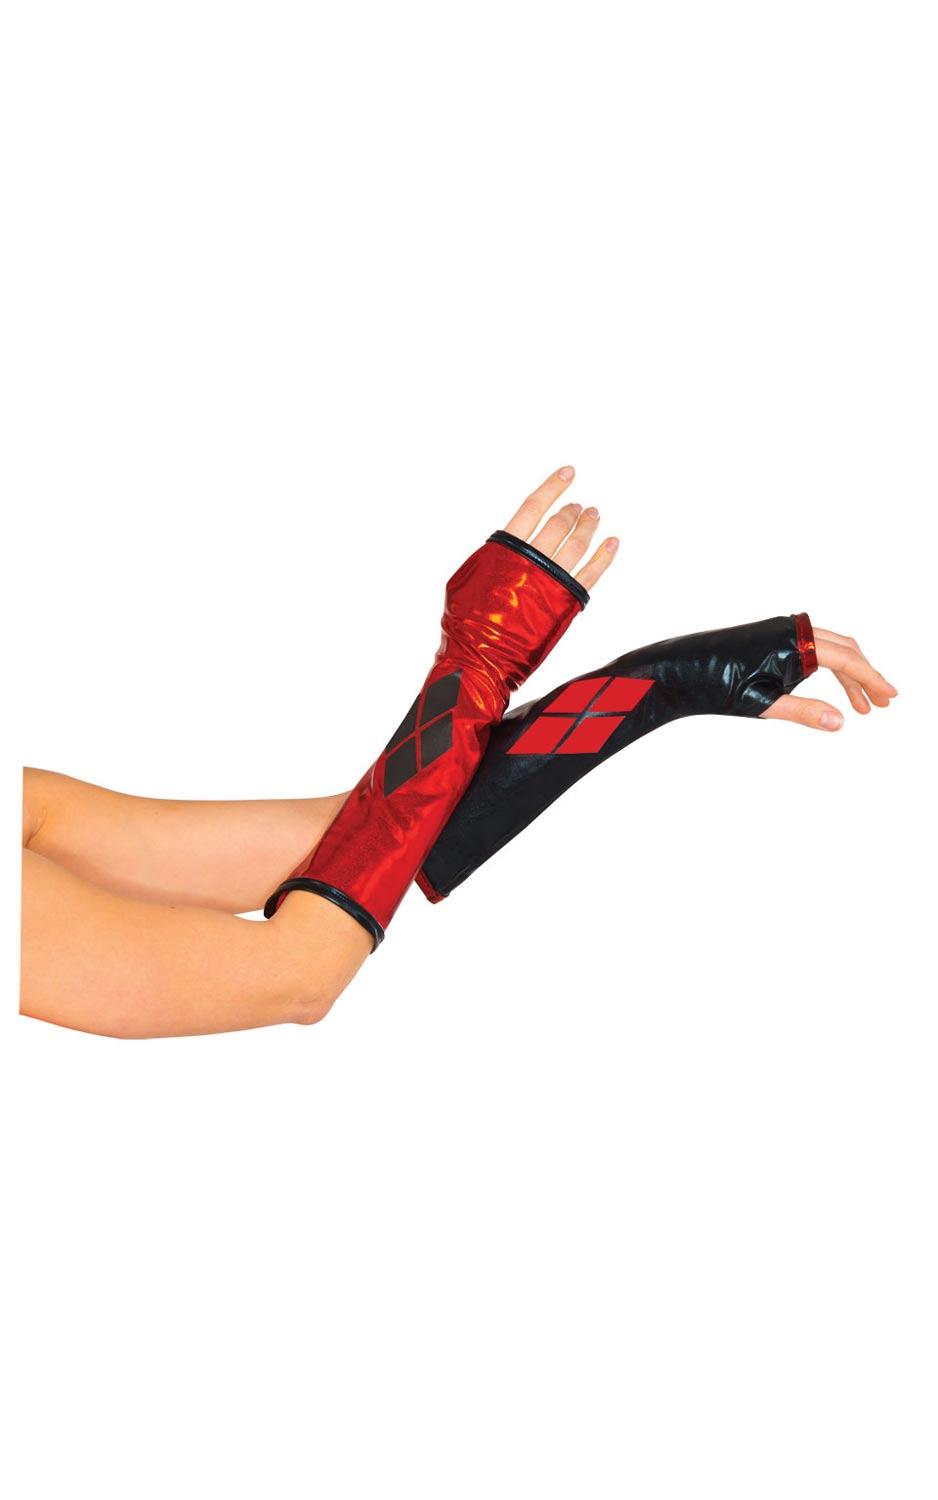 adult sized Harley Quinn Gauntlets by Rubies 32227 available here at Karnival Costumes online superhero party shop